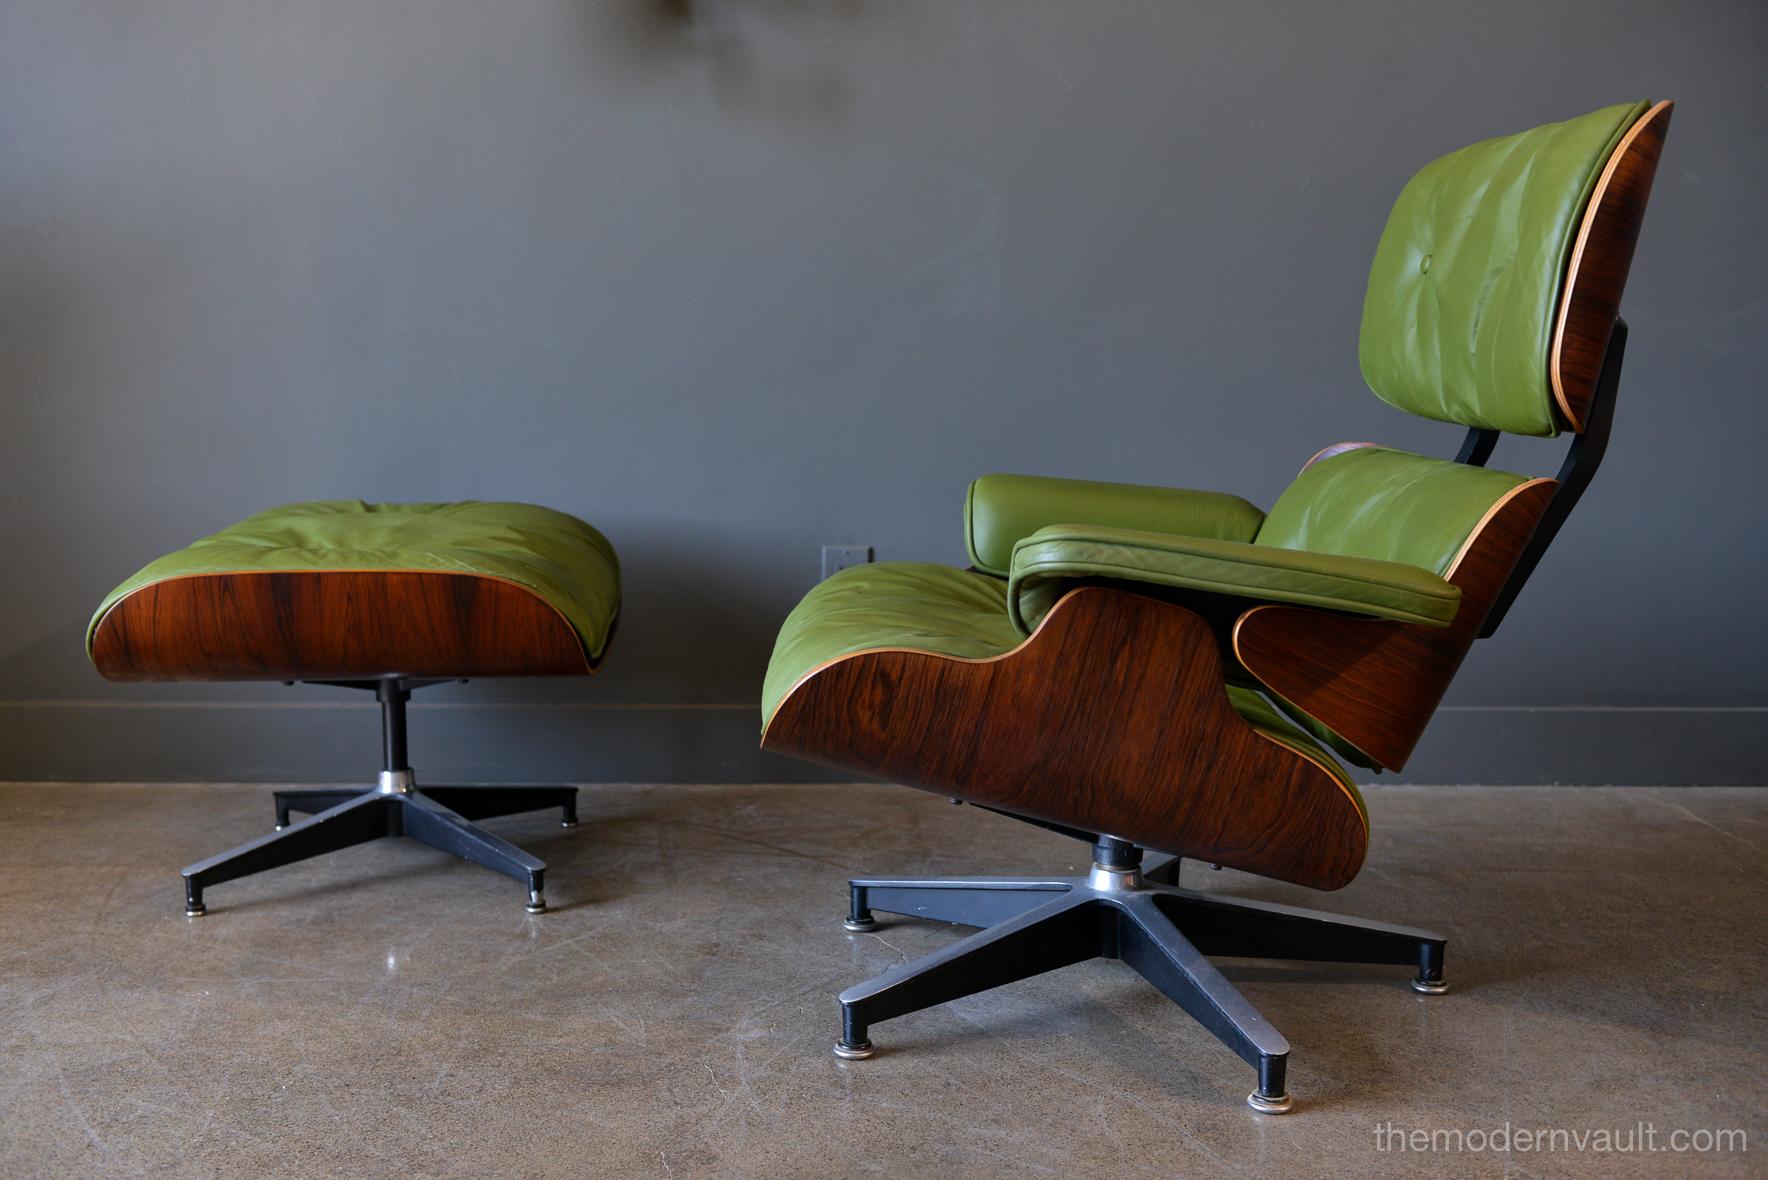 Avocado green leather Eames lounge chair and ottoman, 1967. This green color was a special order for a client in 1967, original rosewood frame and ottoman with original floor glides. Shock mounts were replaced by Hume Modern in 2011. Down filled